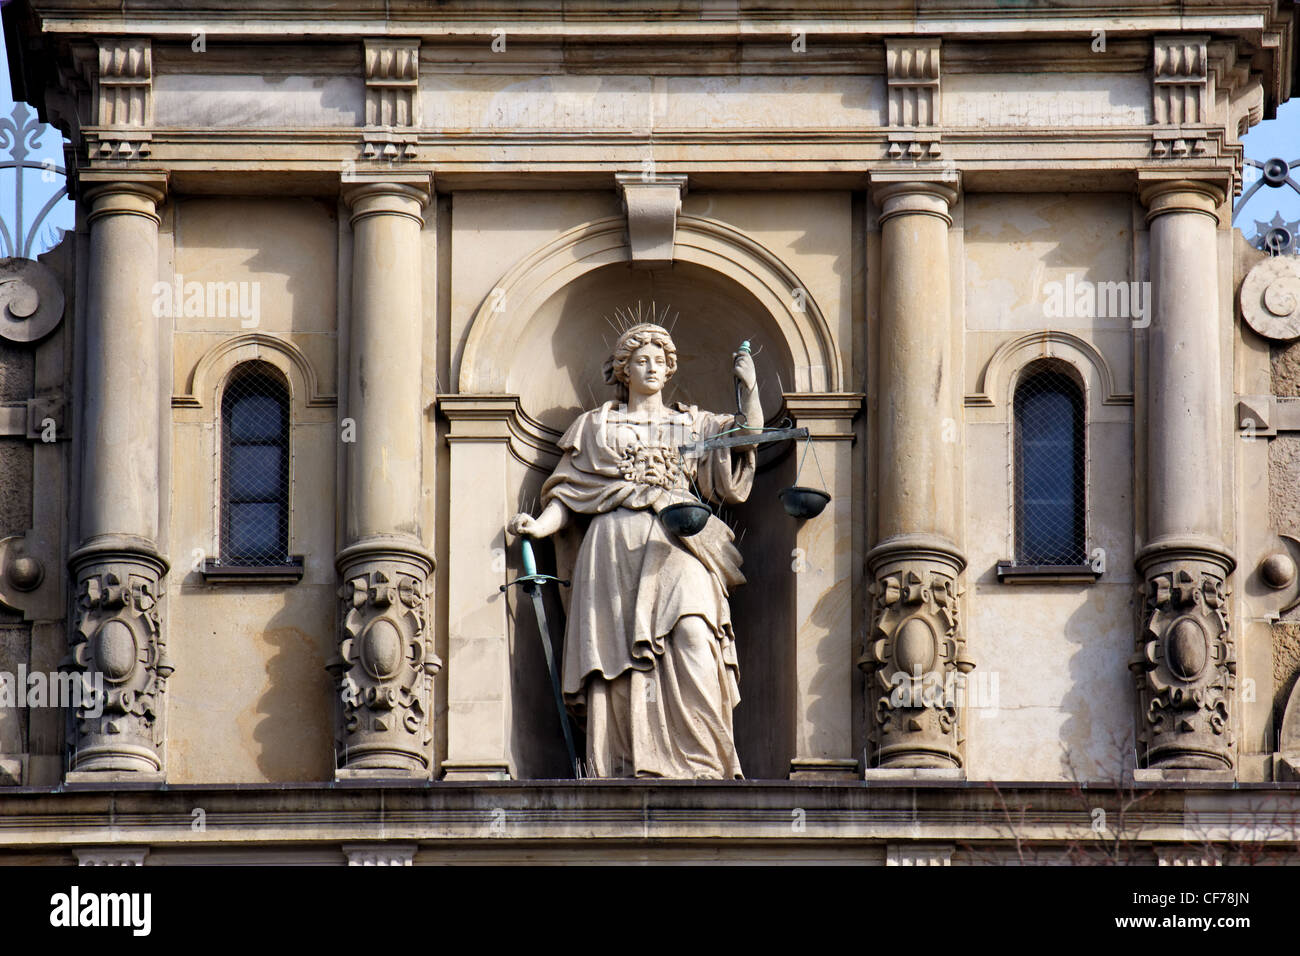 Justitia, Lady Justice, standing with scale and sword at the Strafjustiz Gebäude (criminal justice building) in Hamburg. Stock Photo